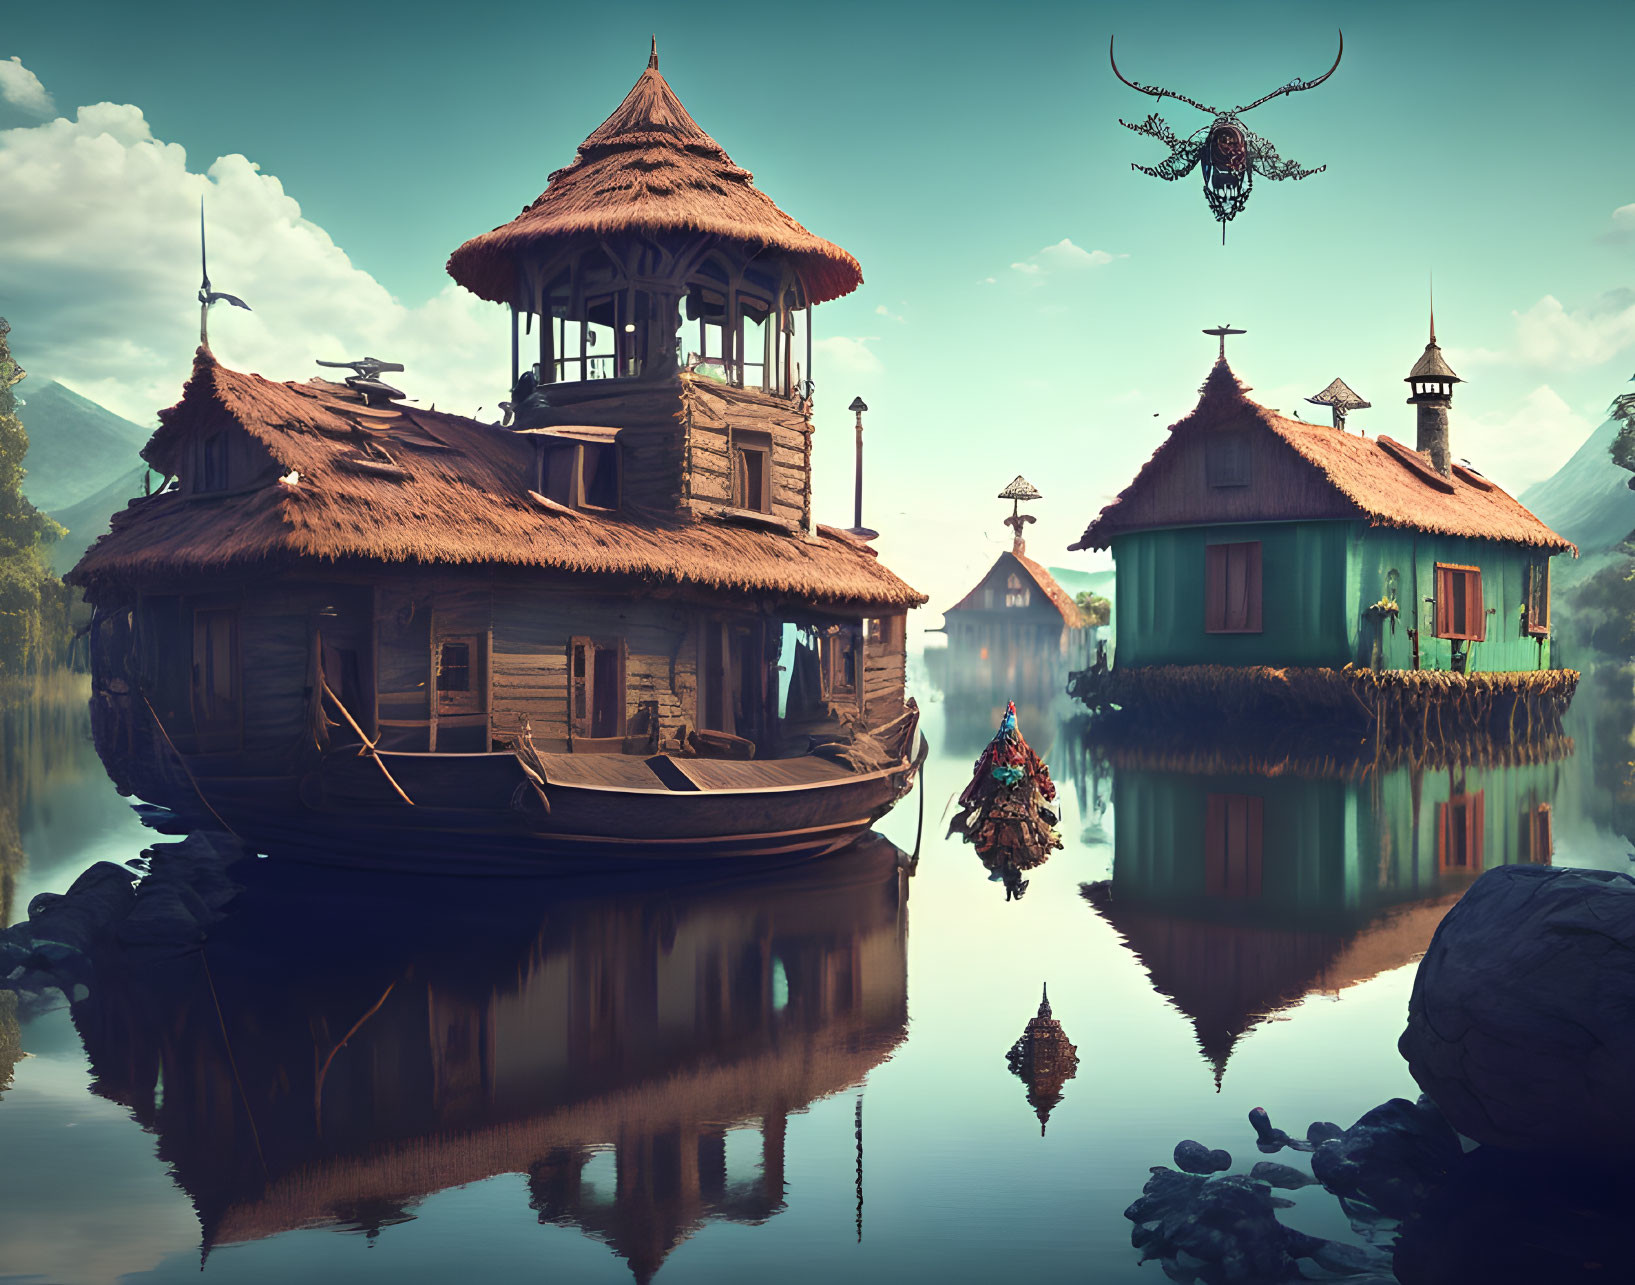 Tranquil fantasy scene with floating thatched houses, mountains, and futuristic airships